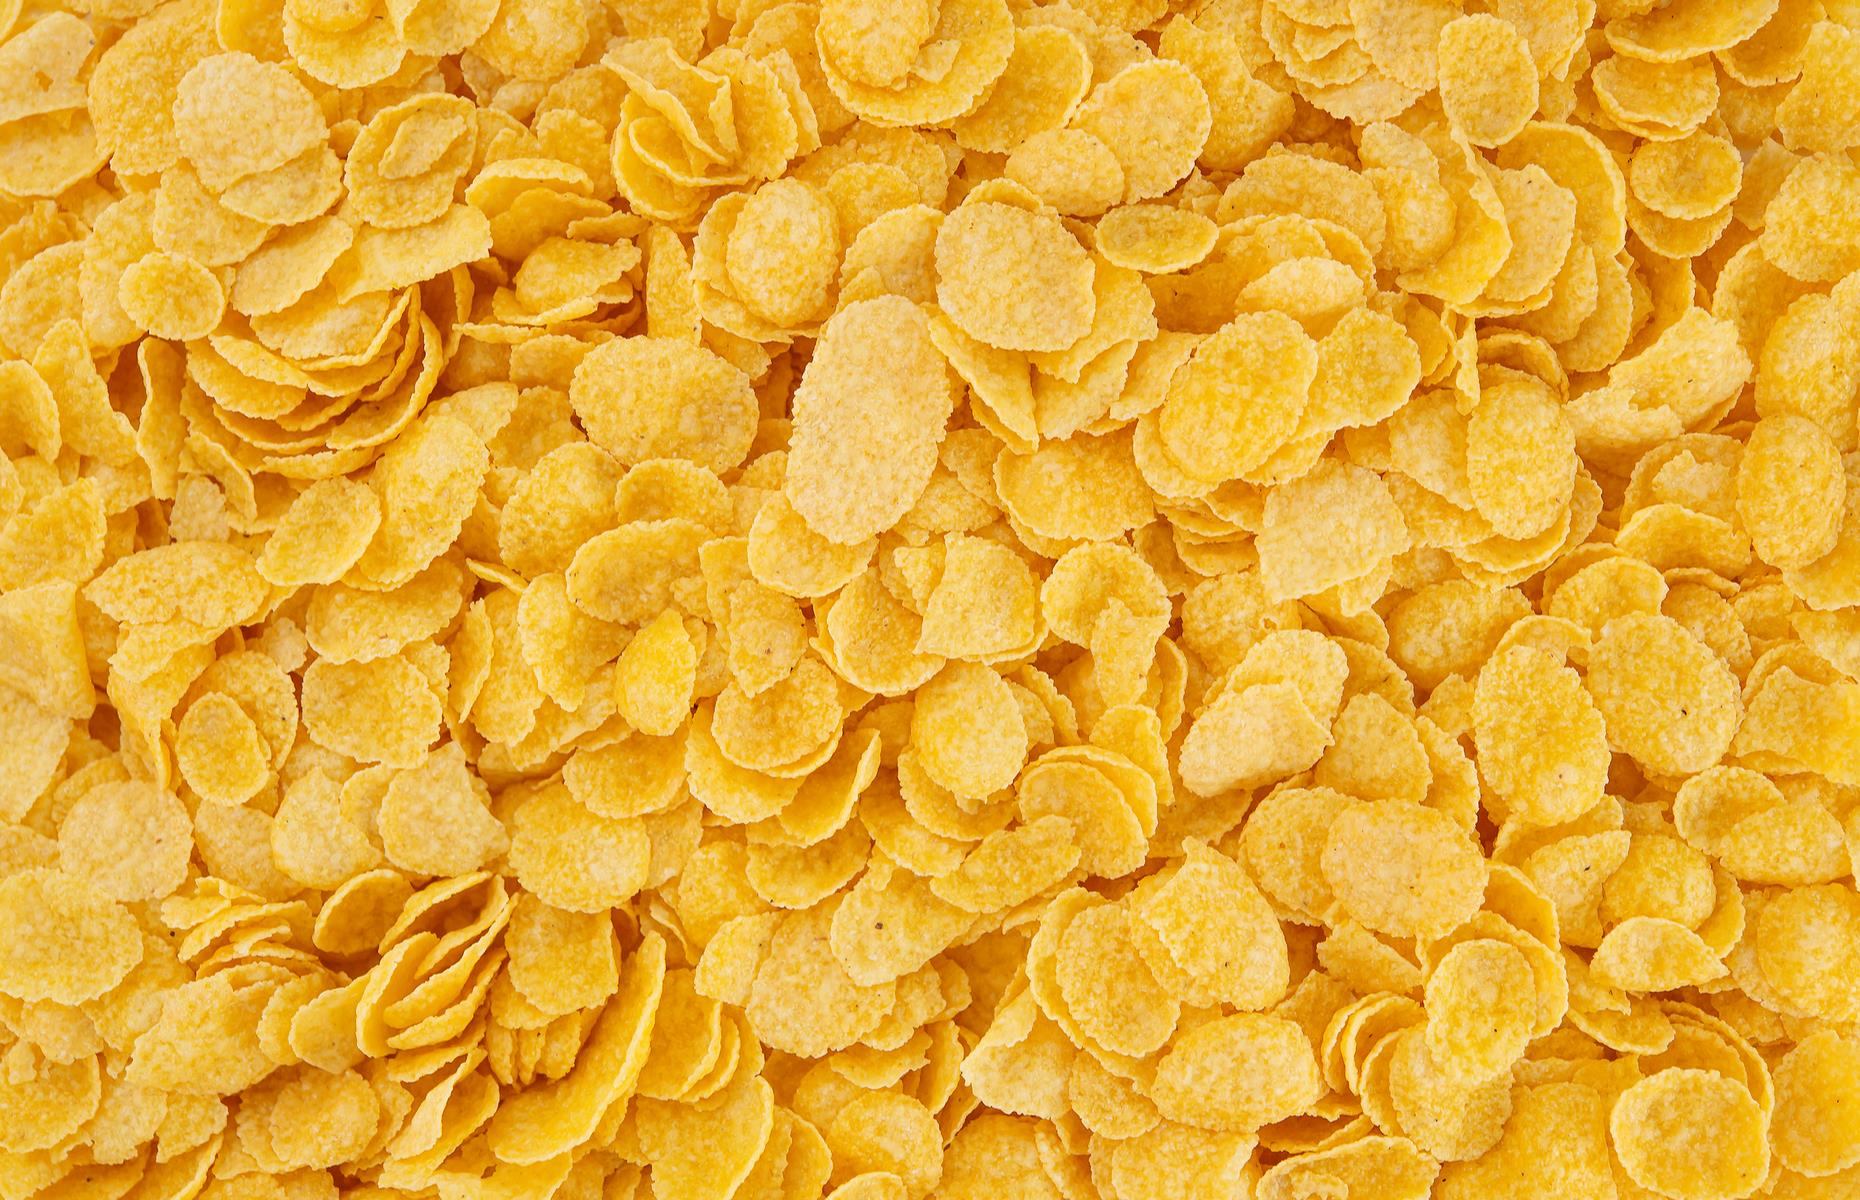 <p>Dr John Harvey Kellogg created corn flakes as a food for the patients of the Battle Creek Sanitarium in Michigan, where he was superintendent. Like Sylvester Graham before him, Kellogg believed in making foods as bland as possible to curb sexual urges. And corn flakes fitted the bill perfectly.</p>